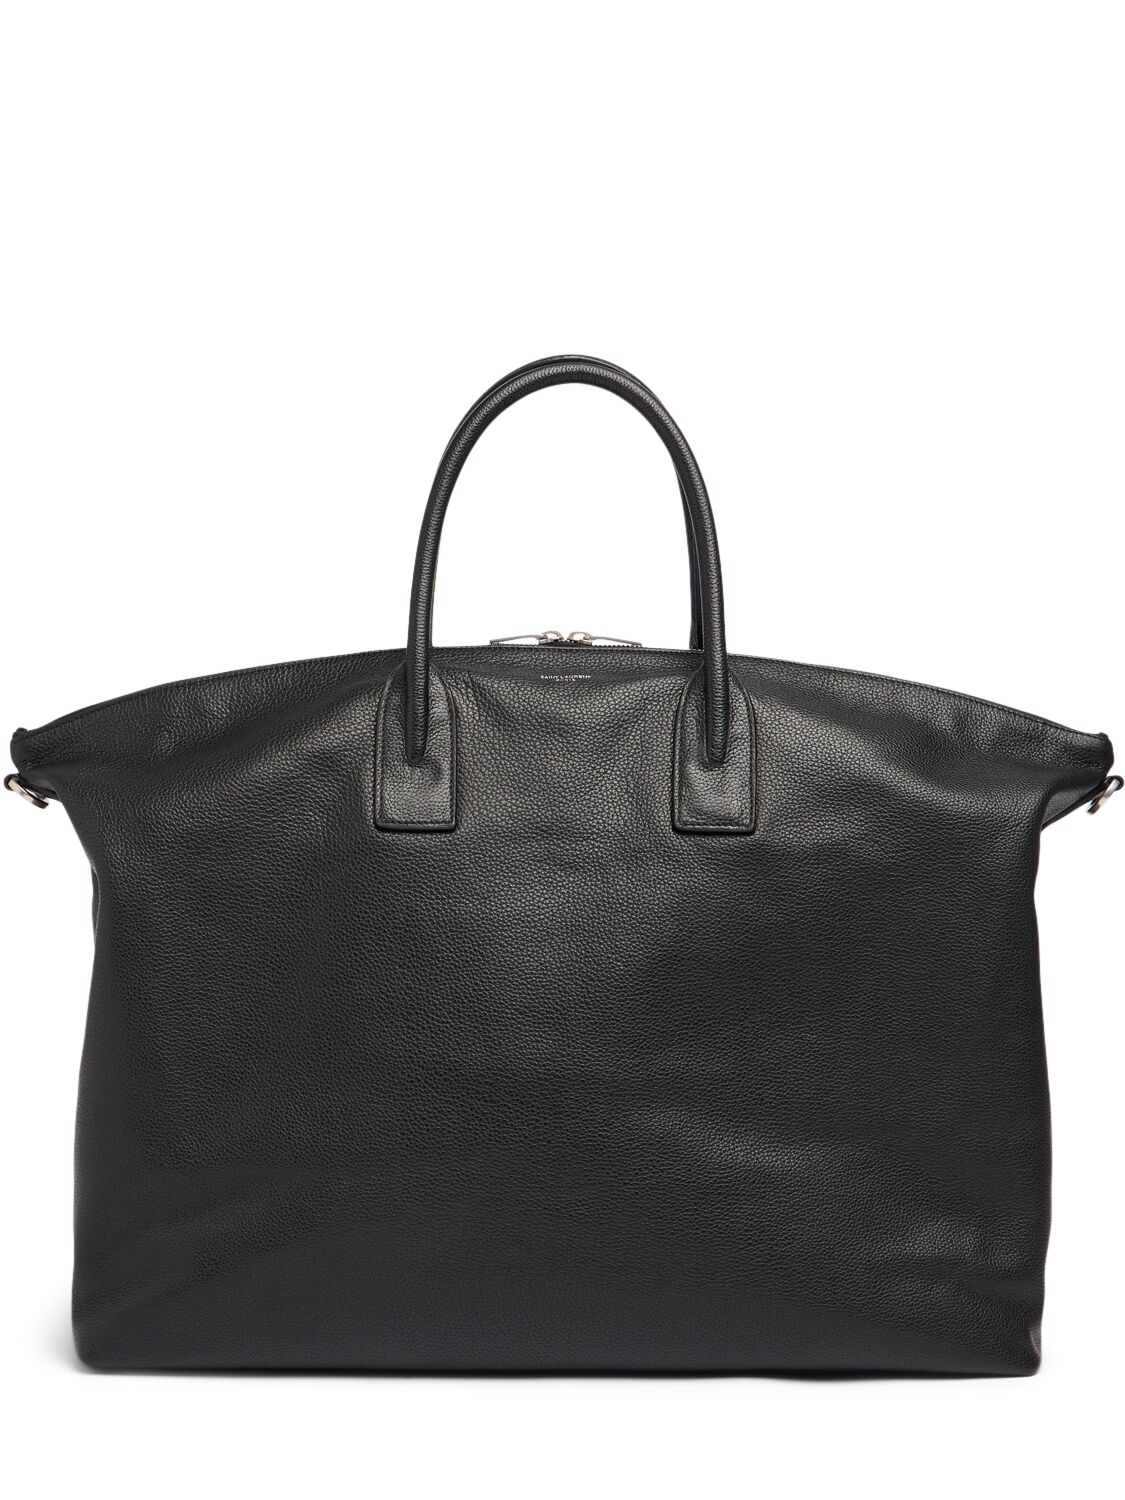 Giant Bowling Leather Tote Bag